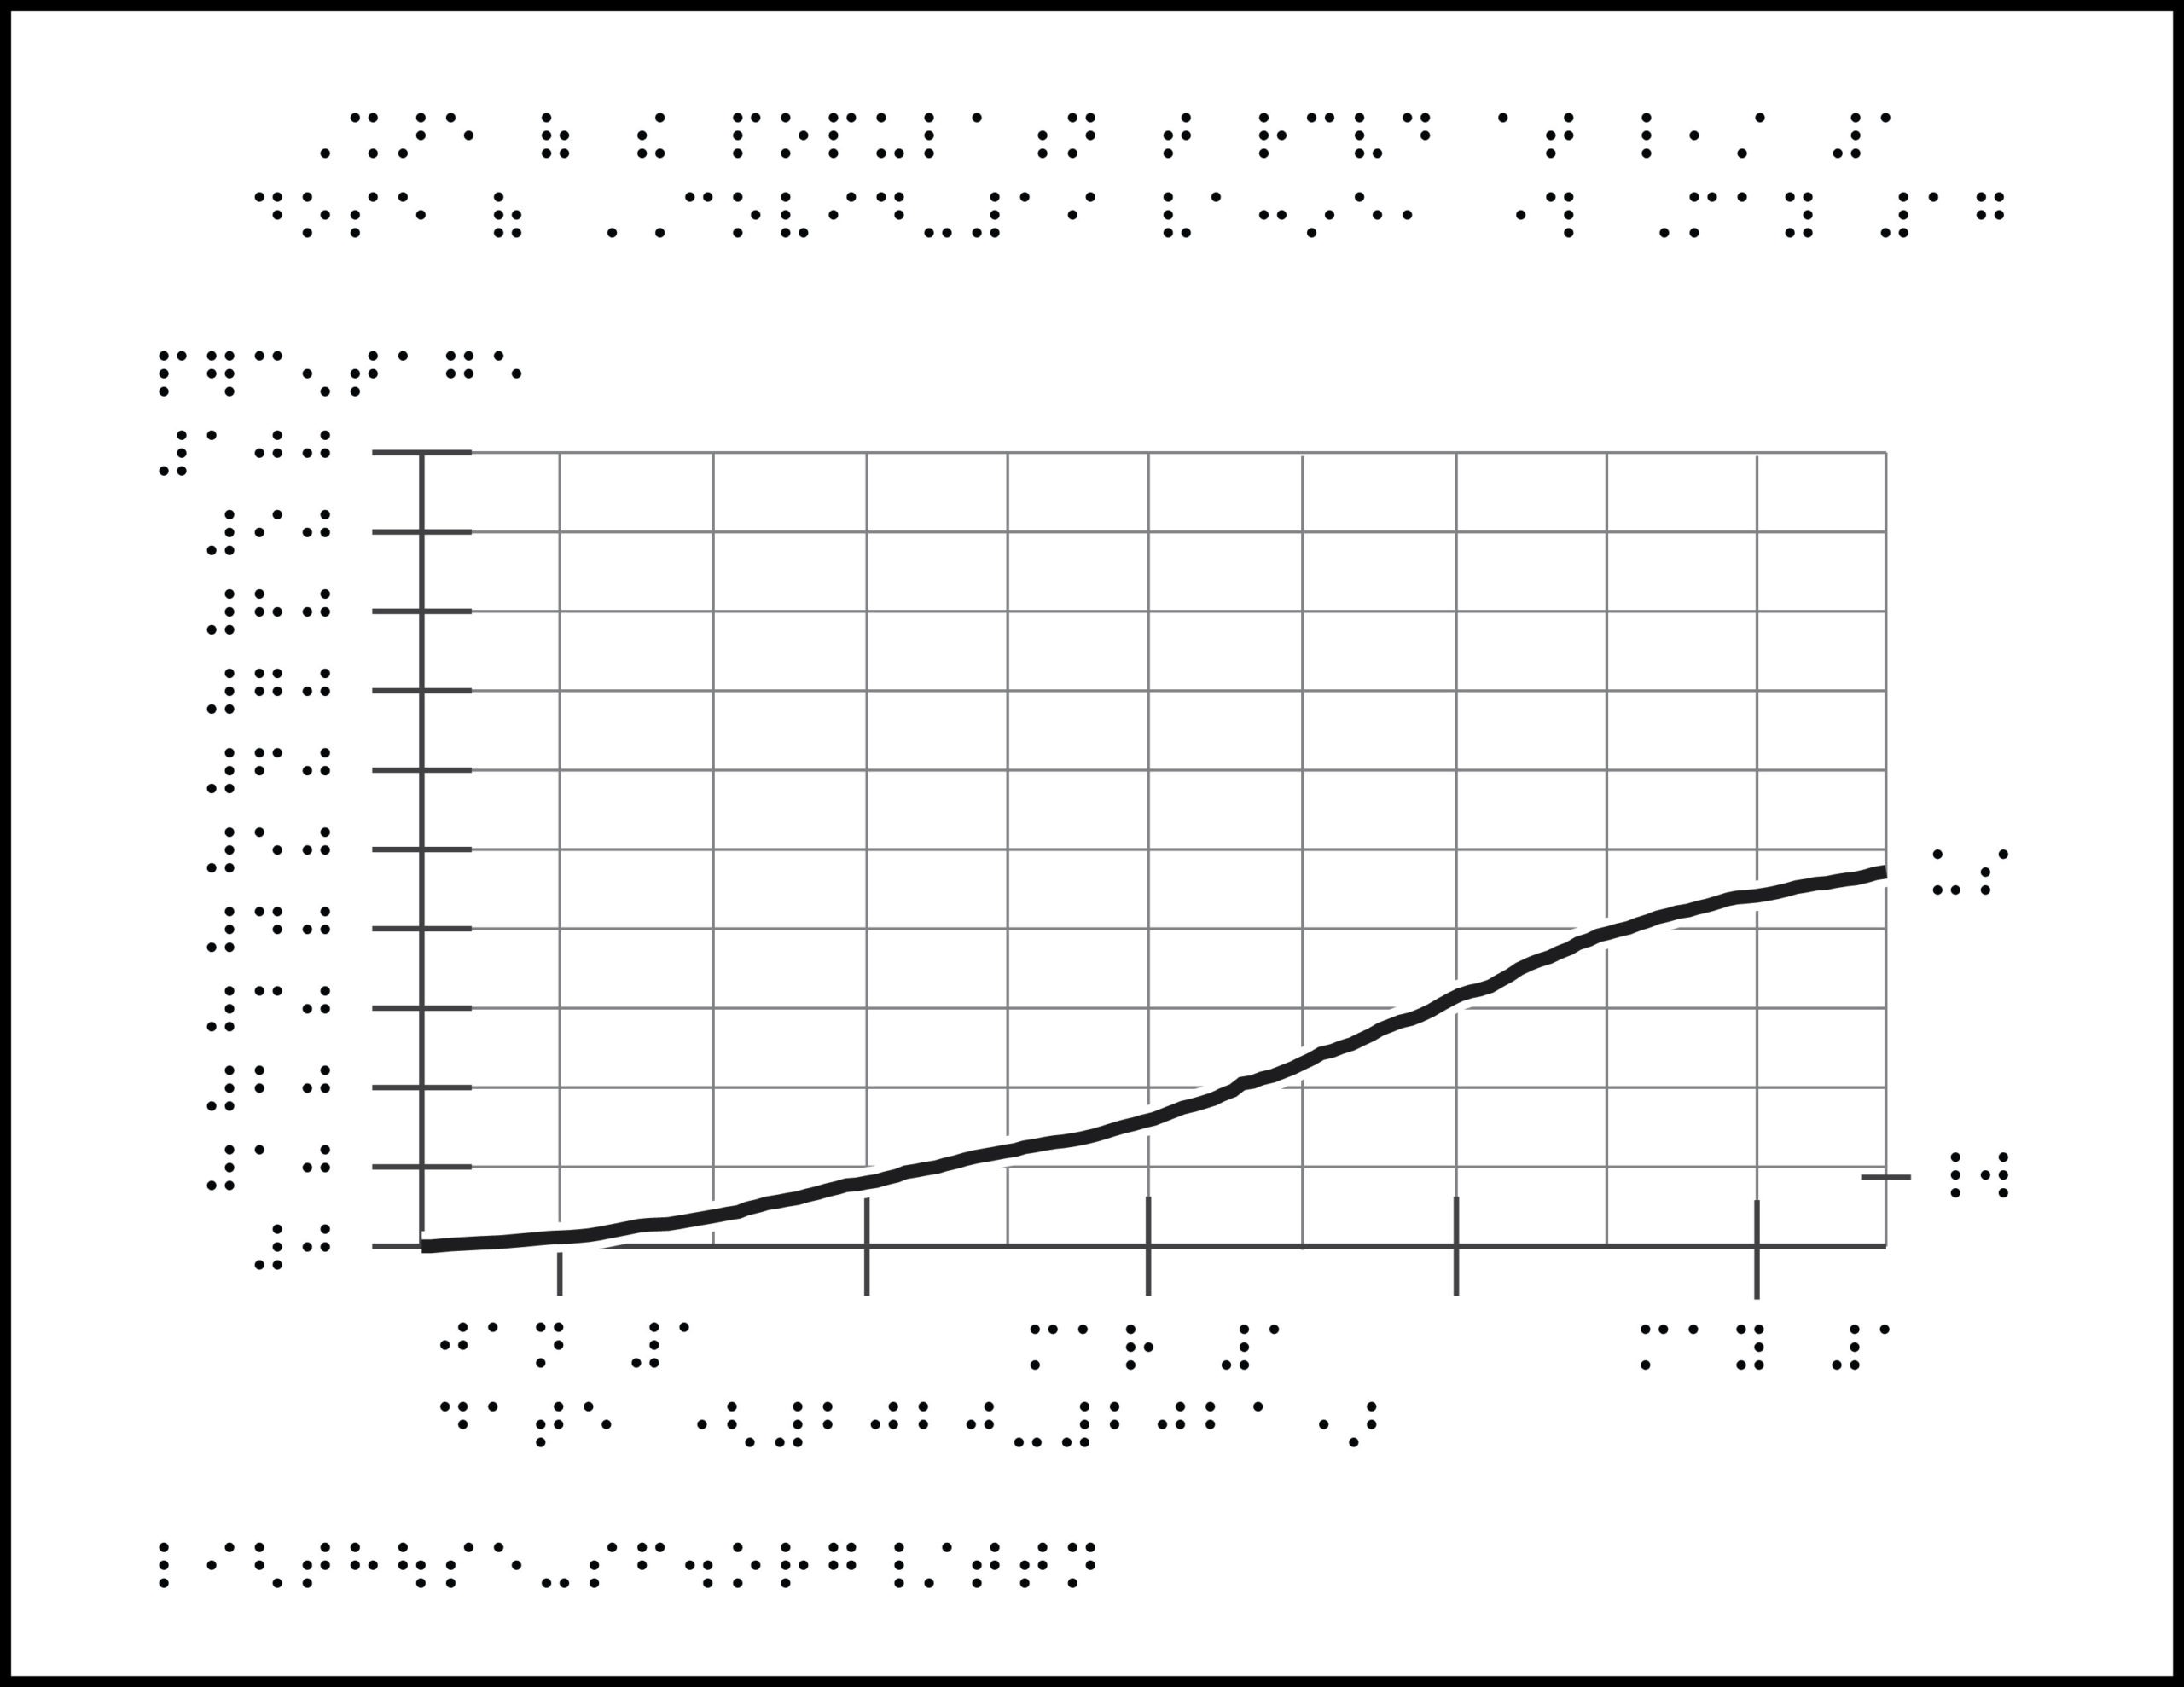 graph with braille labels, line increasing from origin along x- and y-axes